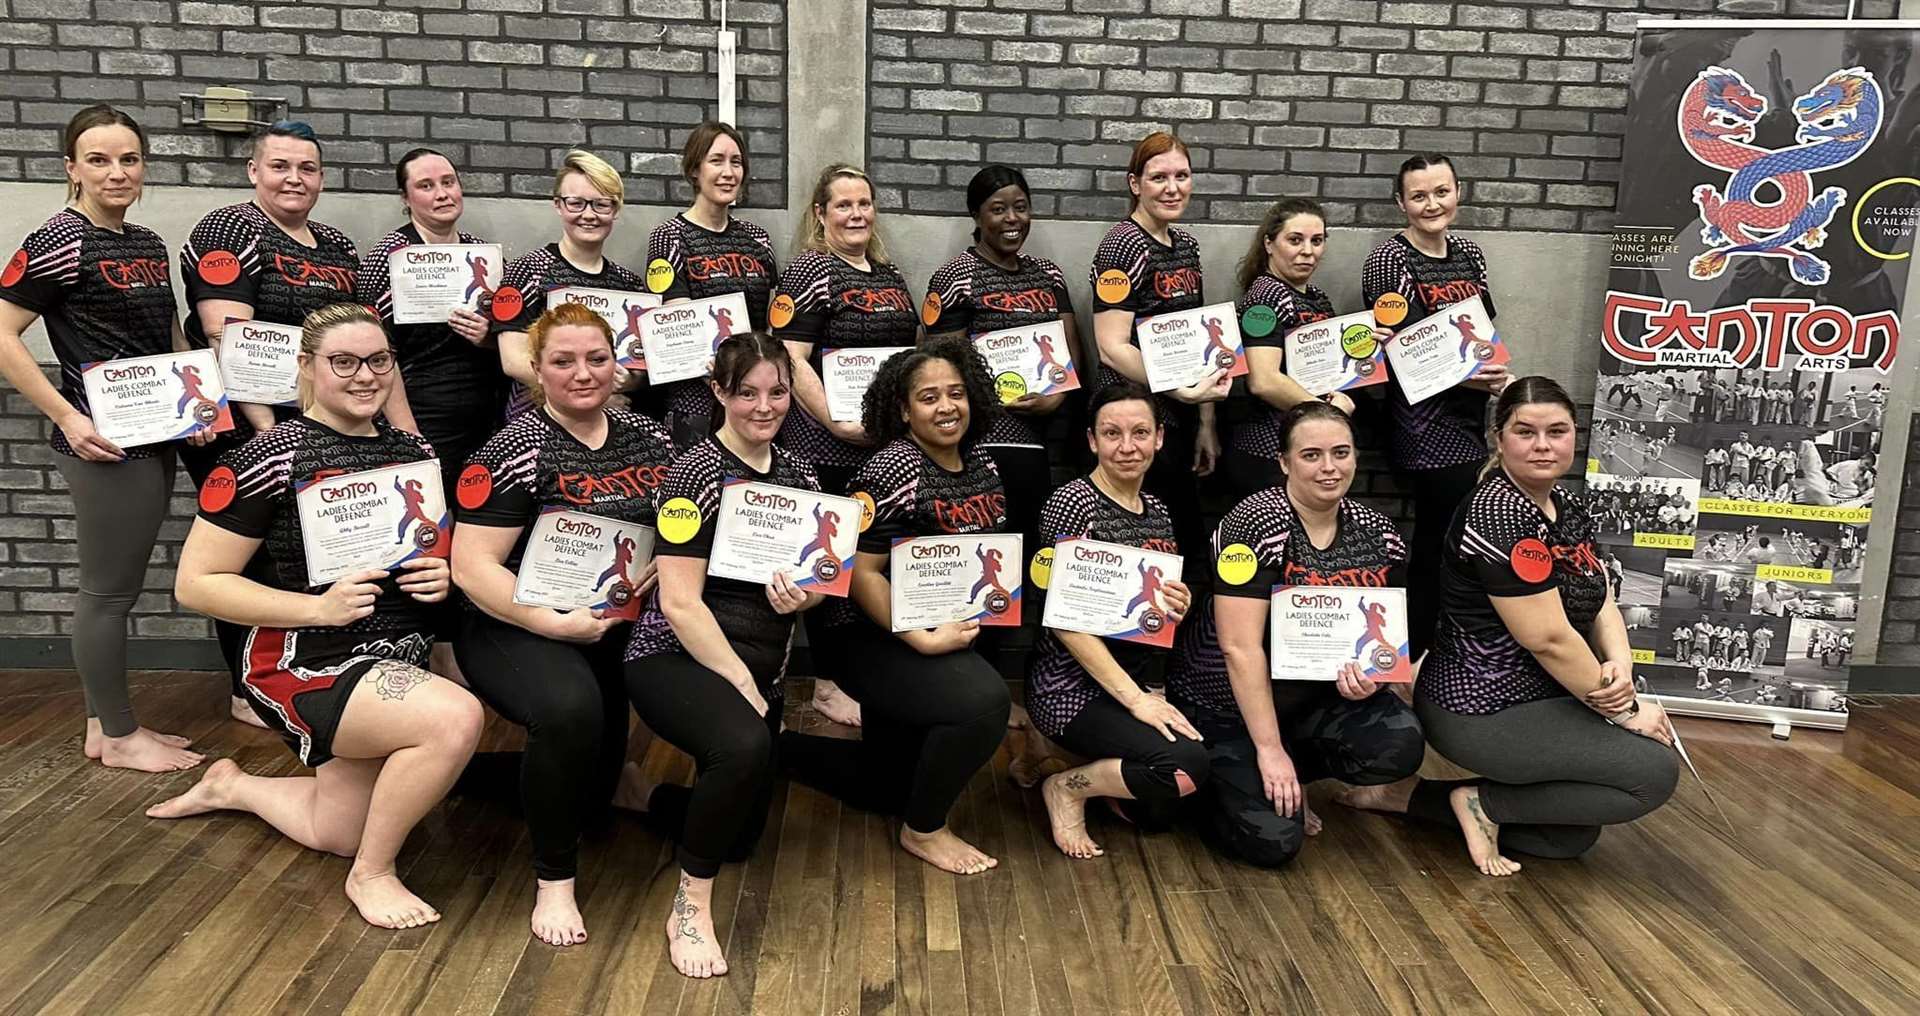 There was grading success for the members of Canton Martial Arts in Ashford as the club's first anniversary approaches